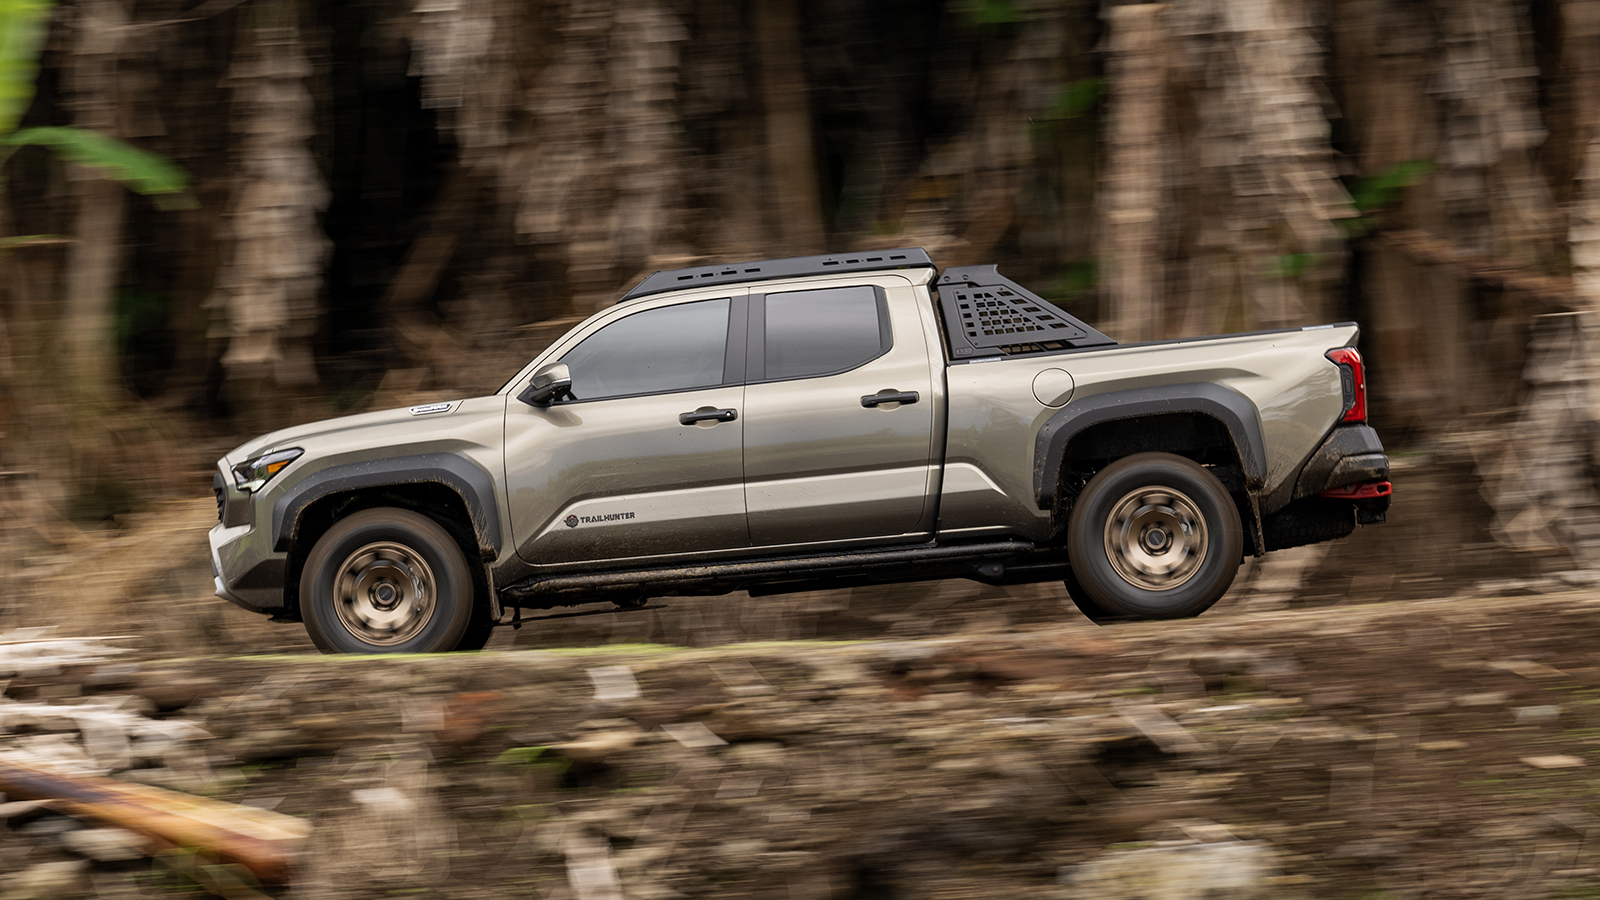 Toyota Trailhunter is the rugged and ready new overlanding